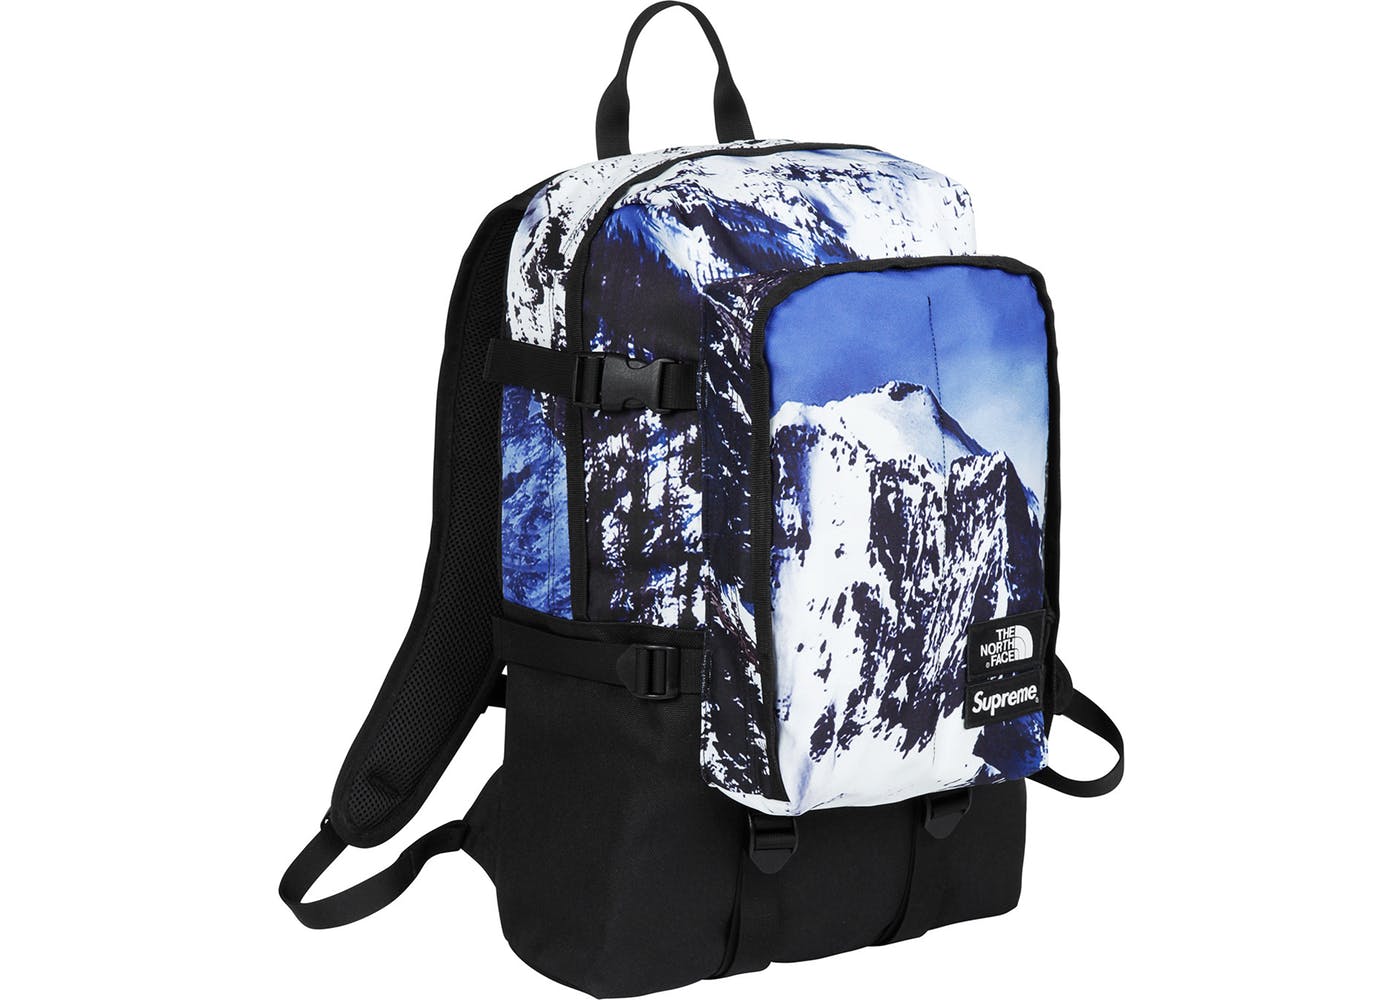 Supreme The North Face Mountain Expedition Backpack